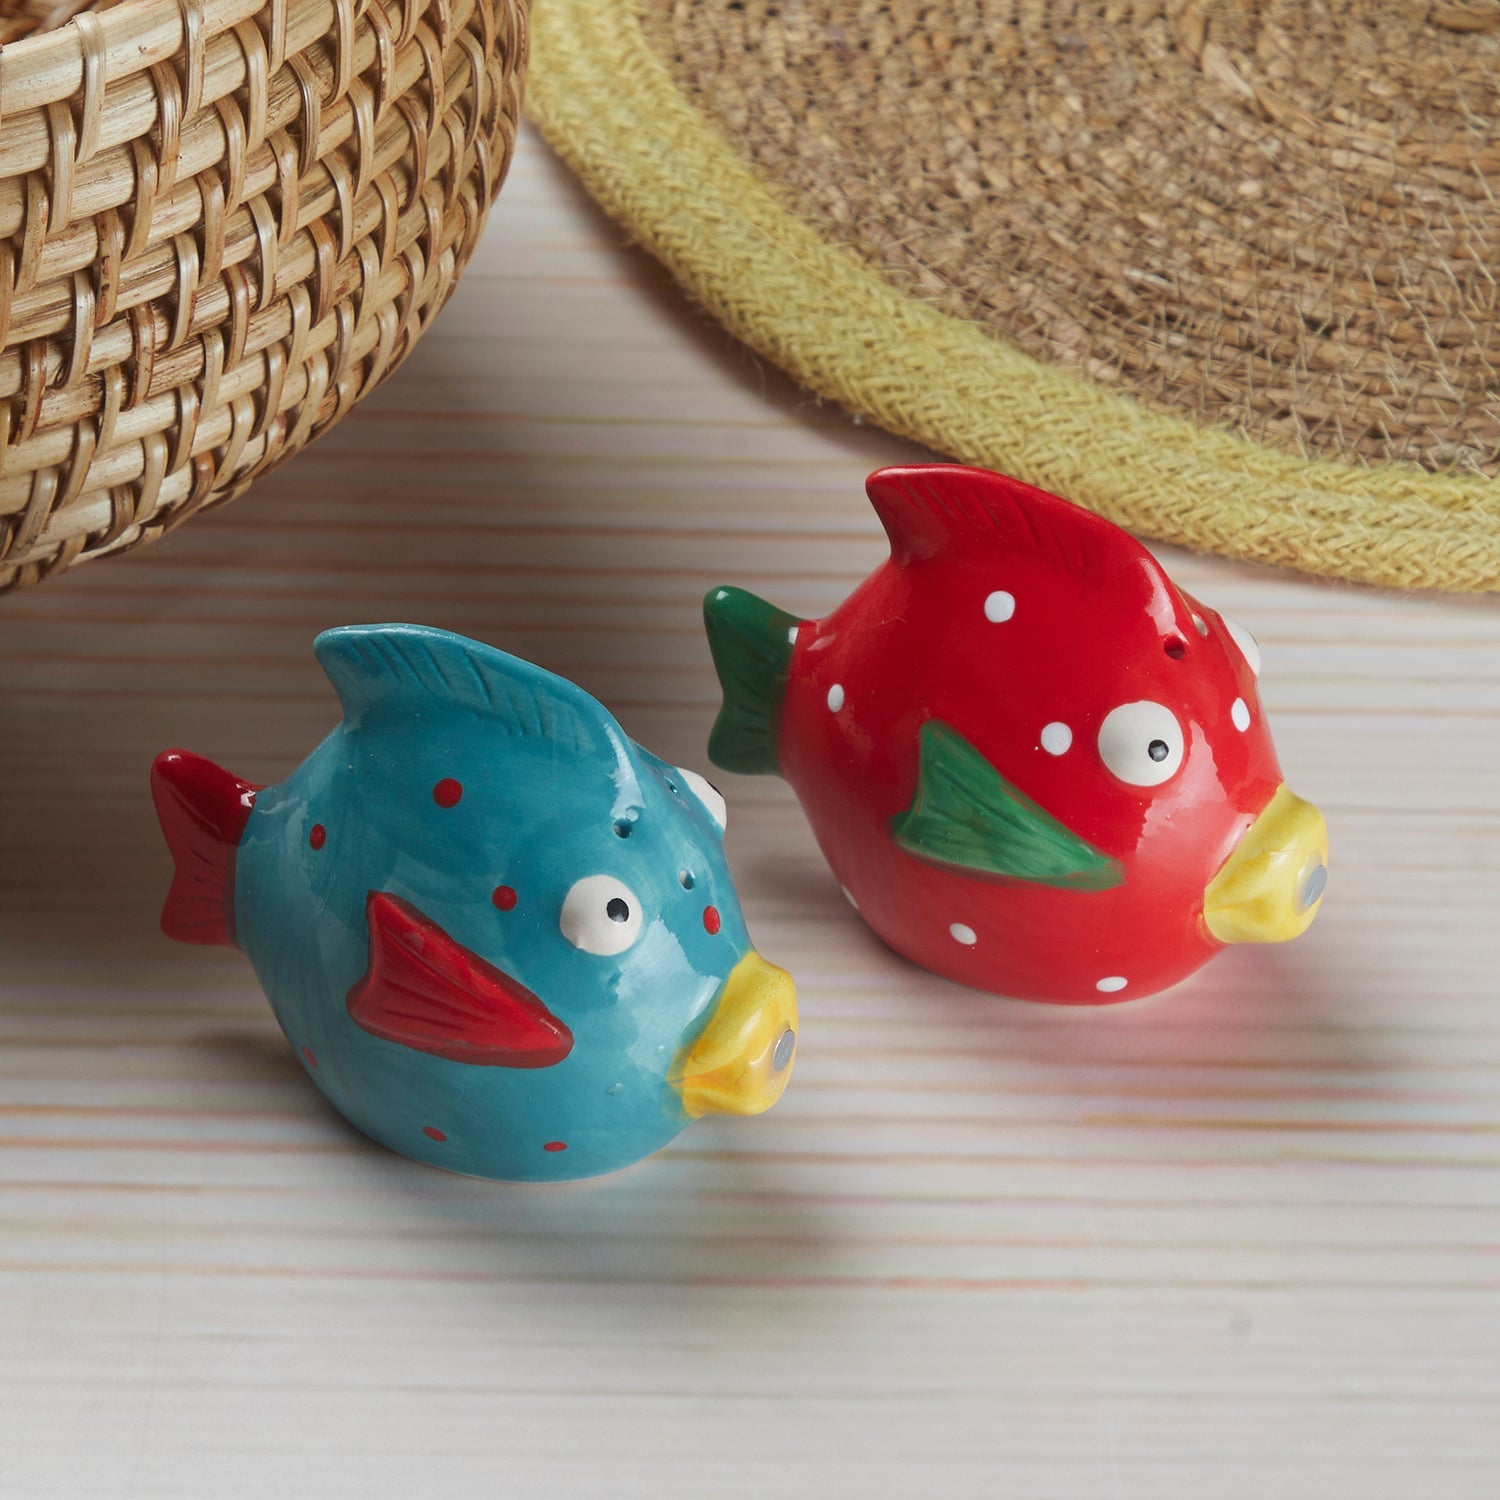 Ceramic Salt and Pepper Set with tray, Fish Design (10281)